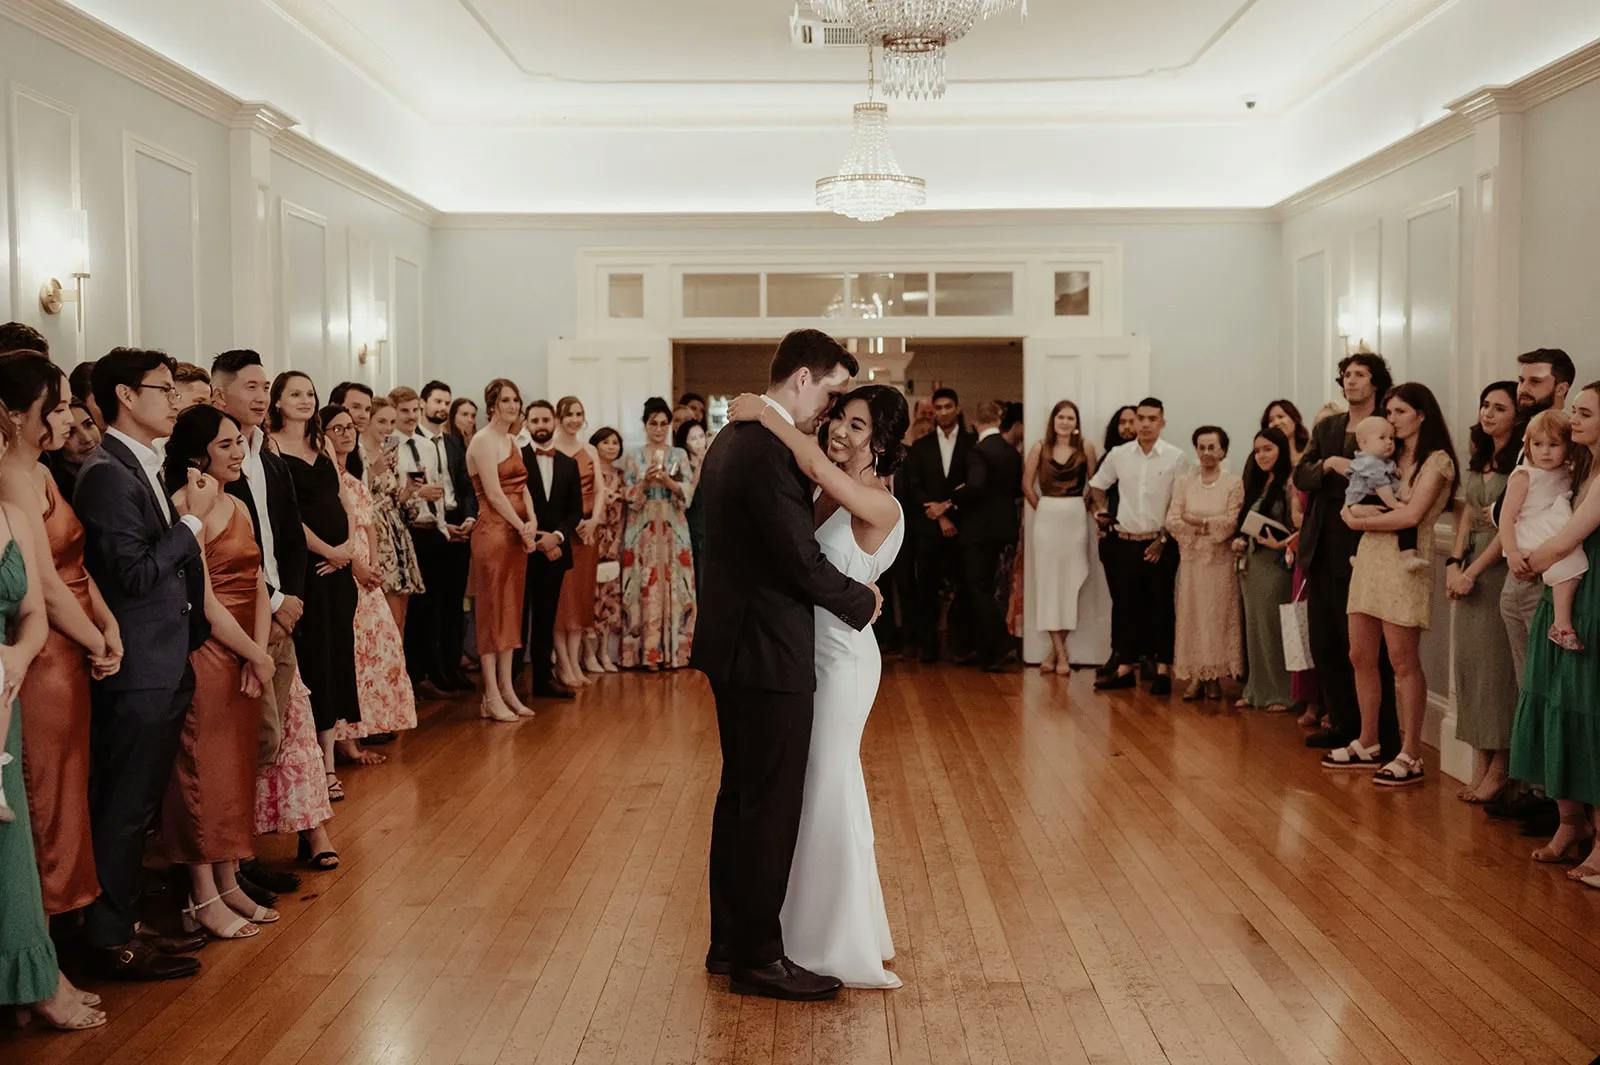 A bride and groom share their first dance in the center of a ballroom, surrounded by guests who watch and smile. The room is brightly lit with chandeliers, and the crowd includes people in formal and semi-formal attire, standing along the walls.